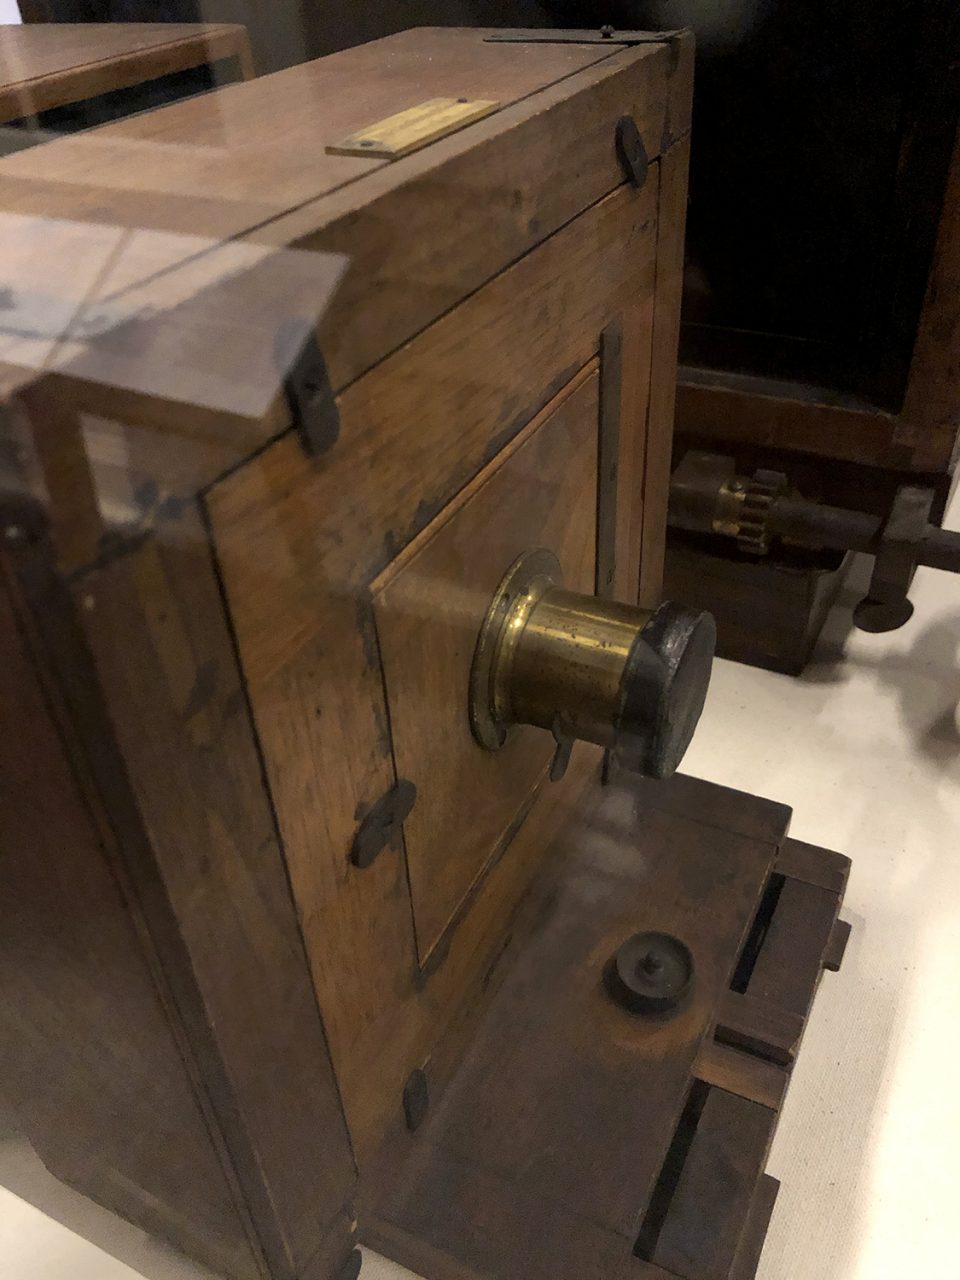 Another view of the lens of the old Daguerreotype camera held on display in the Museum of Charleston.